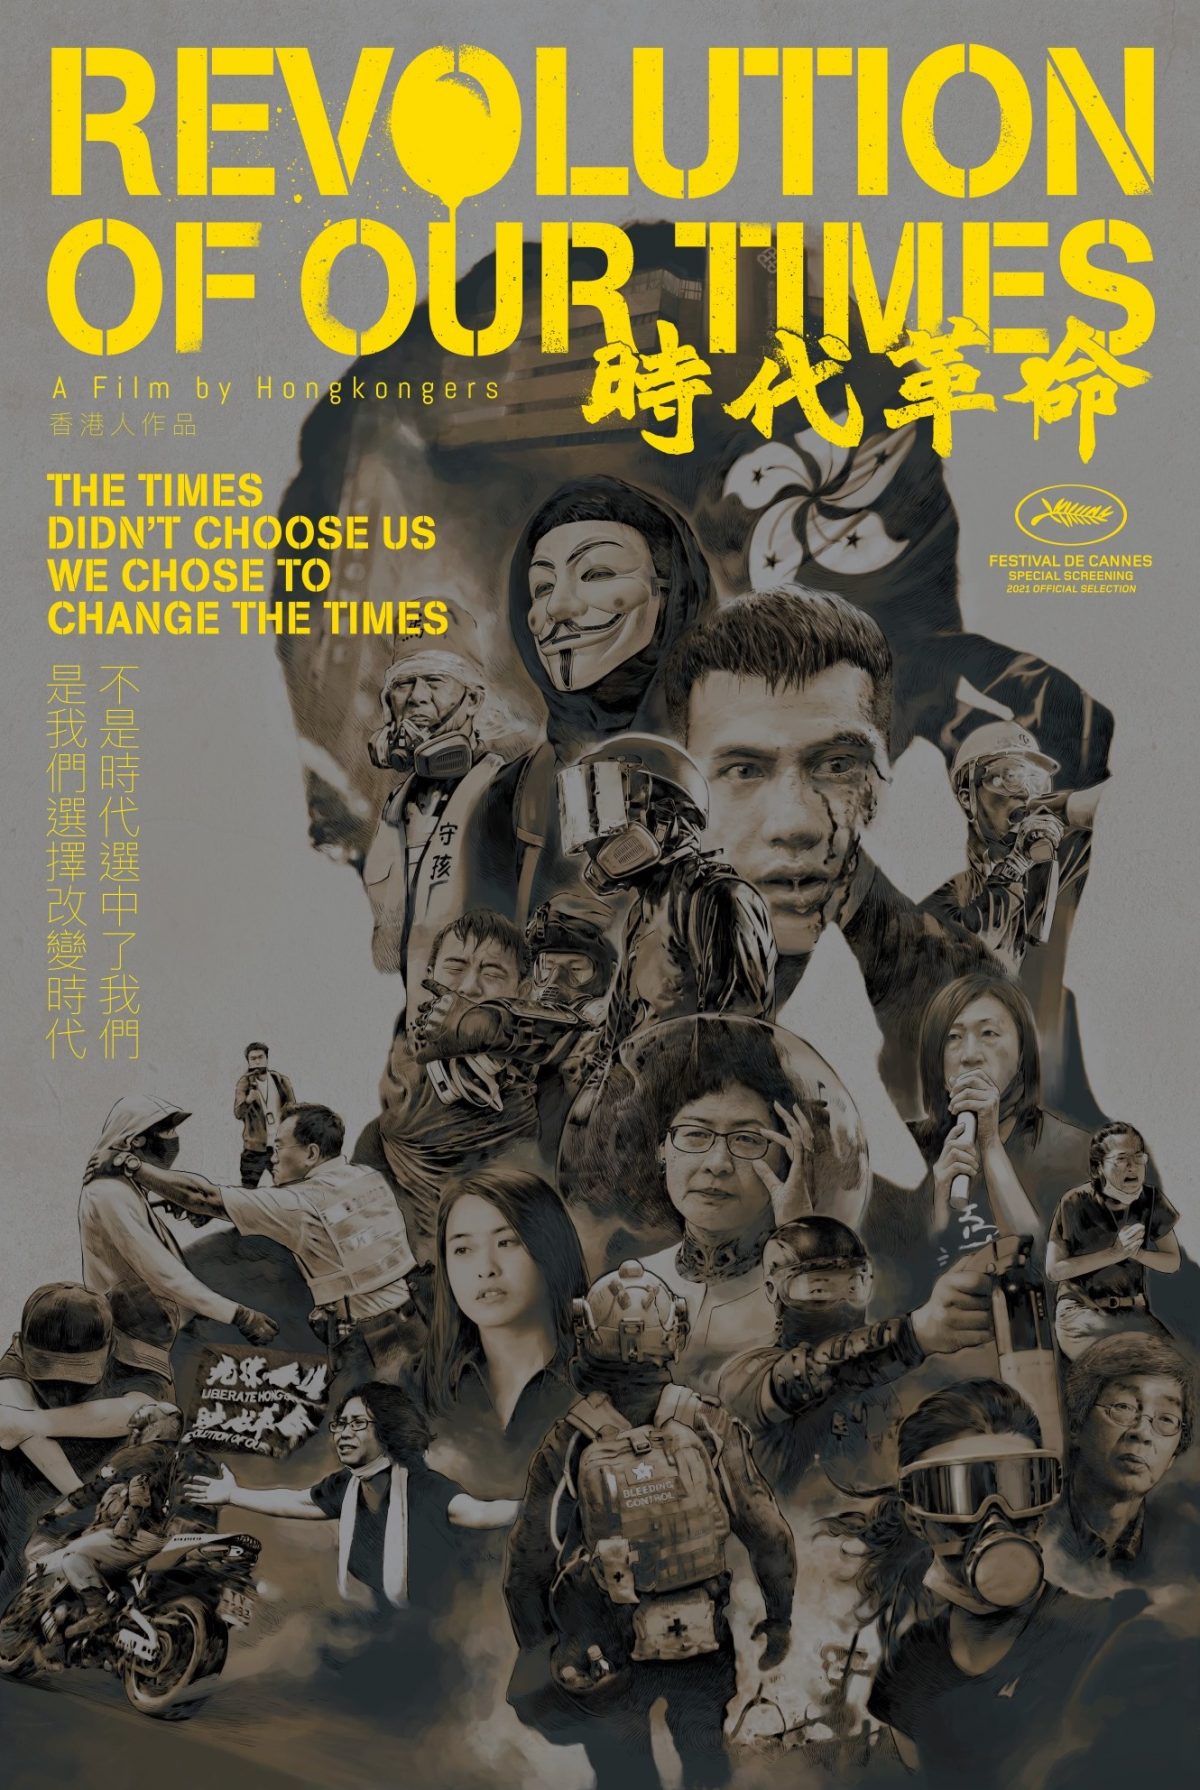 Revolution of Our Times 時代革命 to Screen at Cannes Film Festival